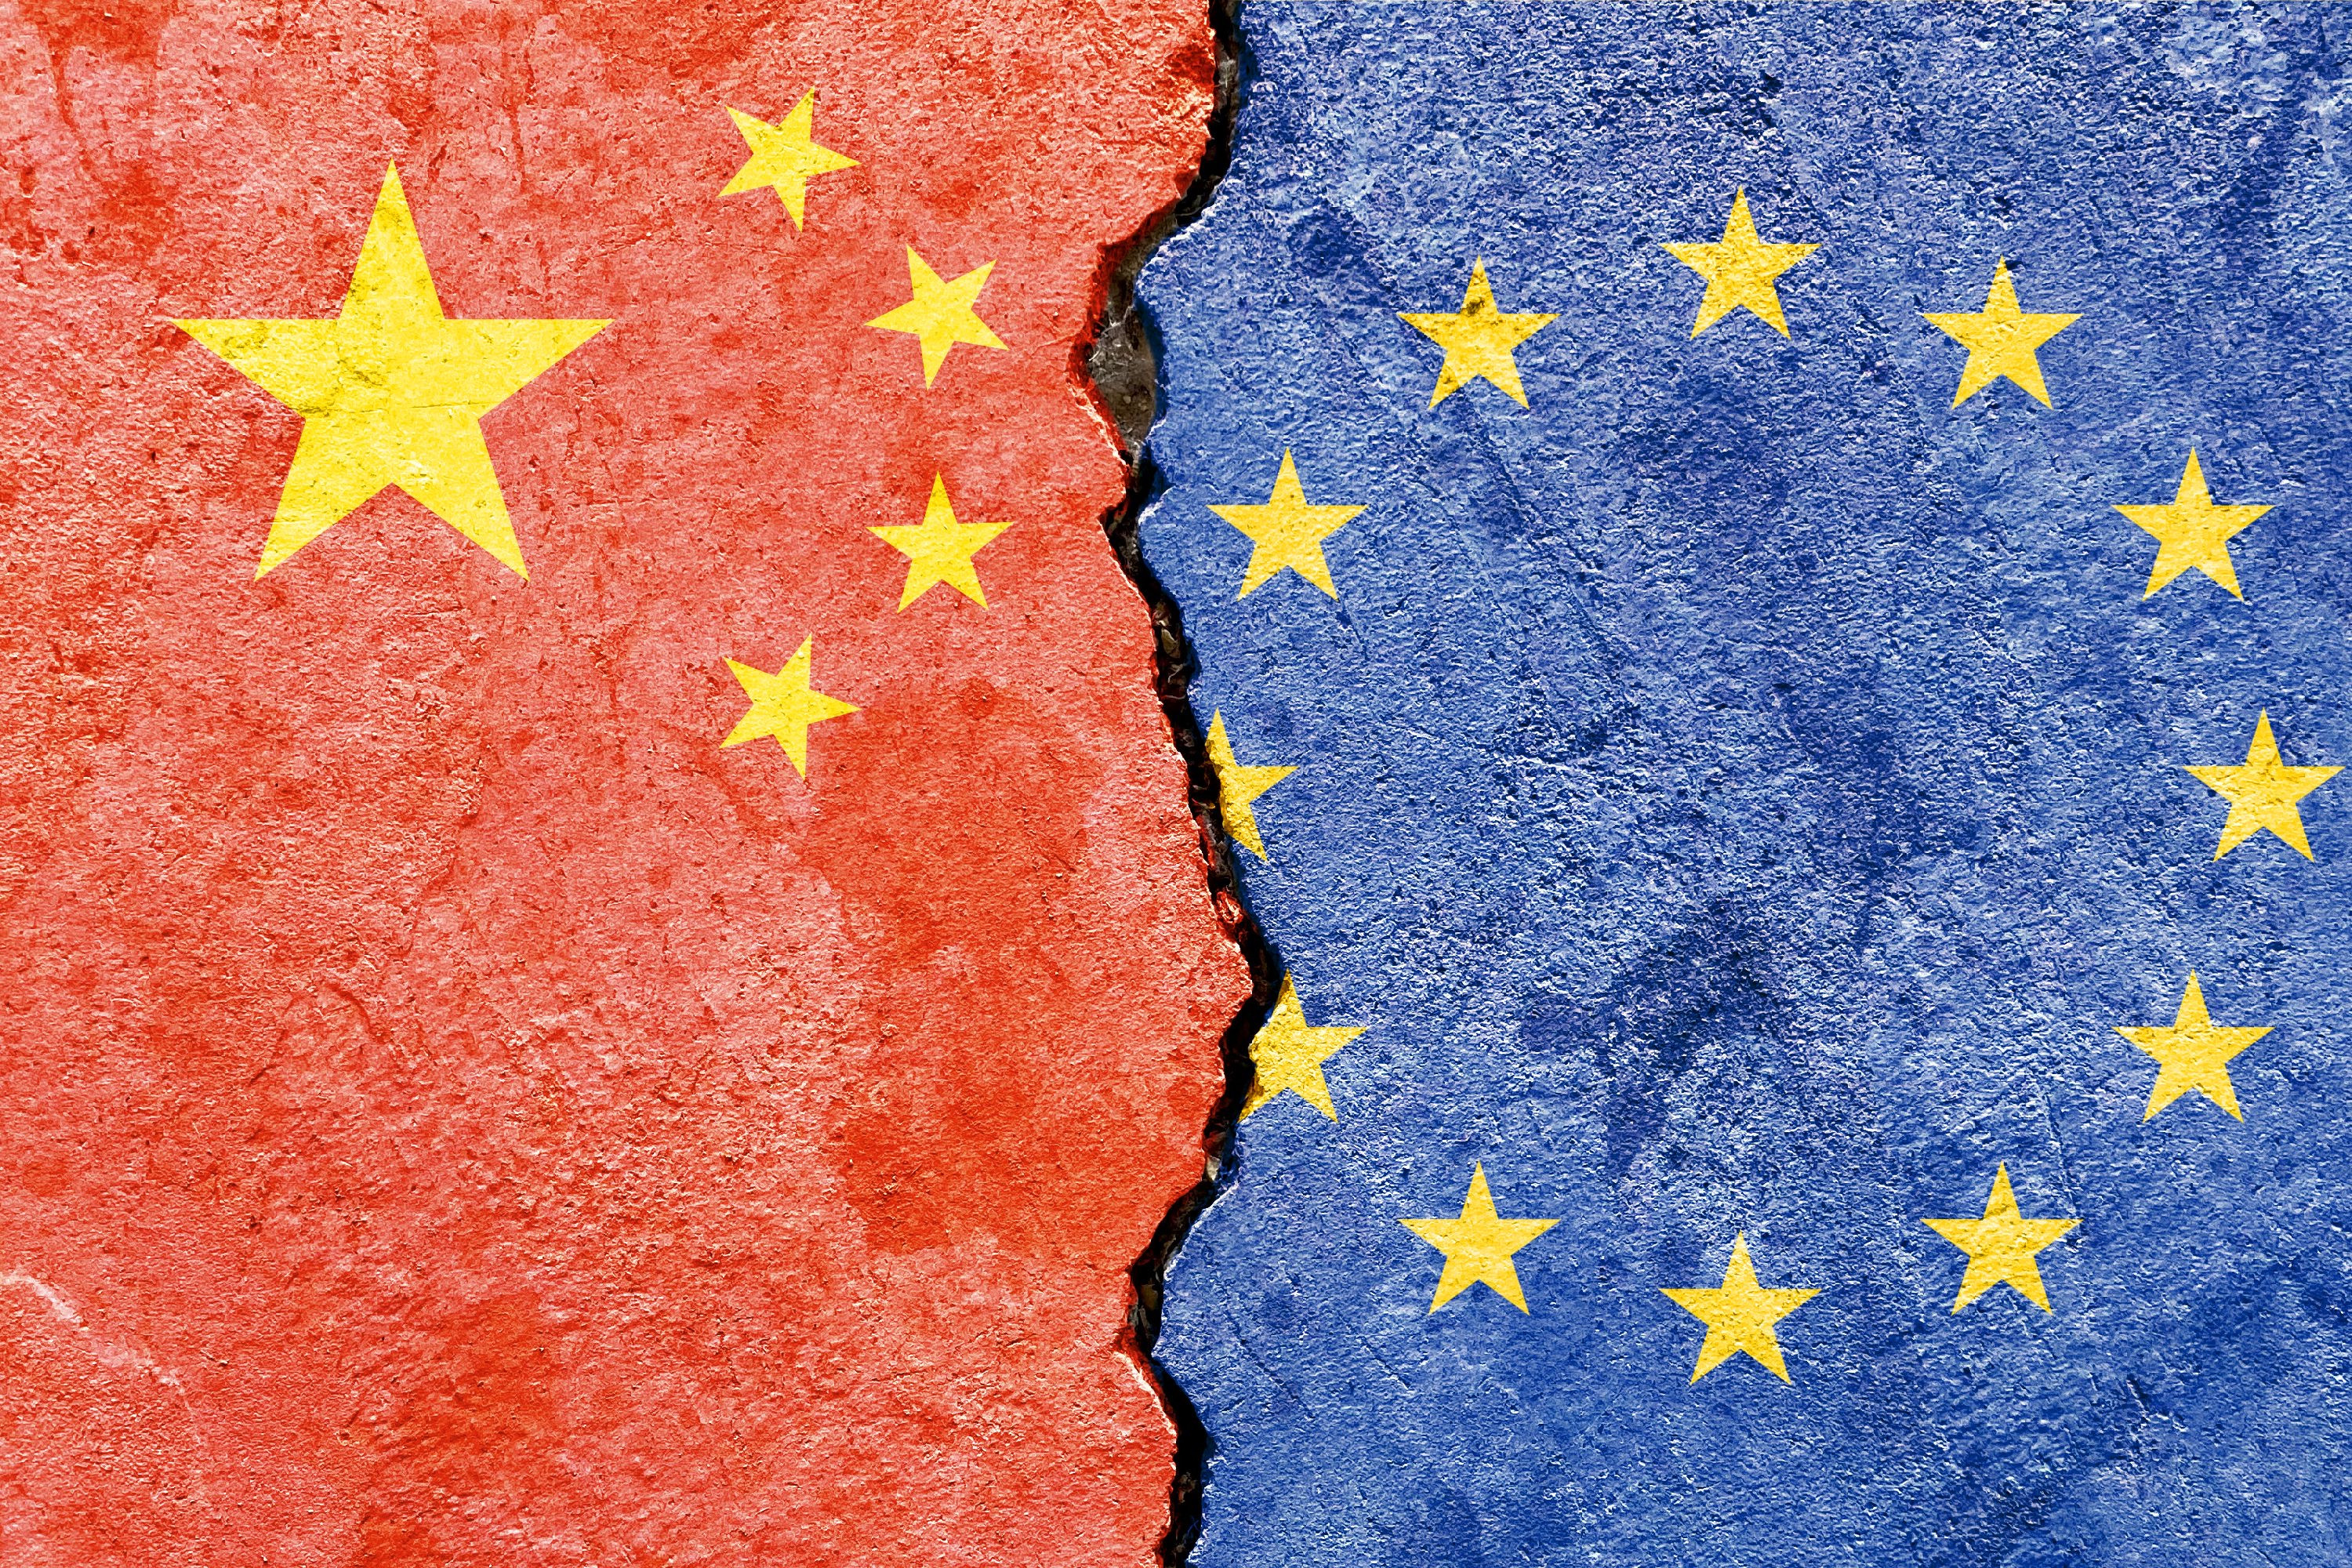 The EU Chamber of Commerce in China has released findings from its annual survey conducted earlier this year. Photo: Shutterstock